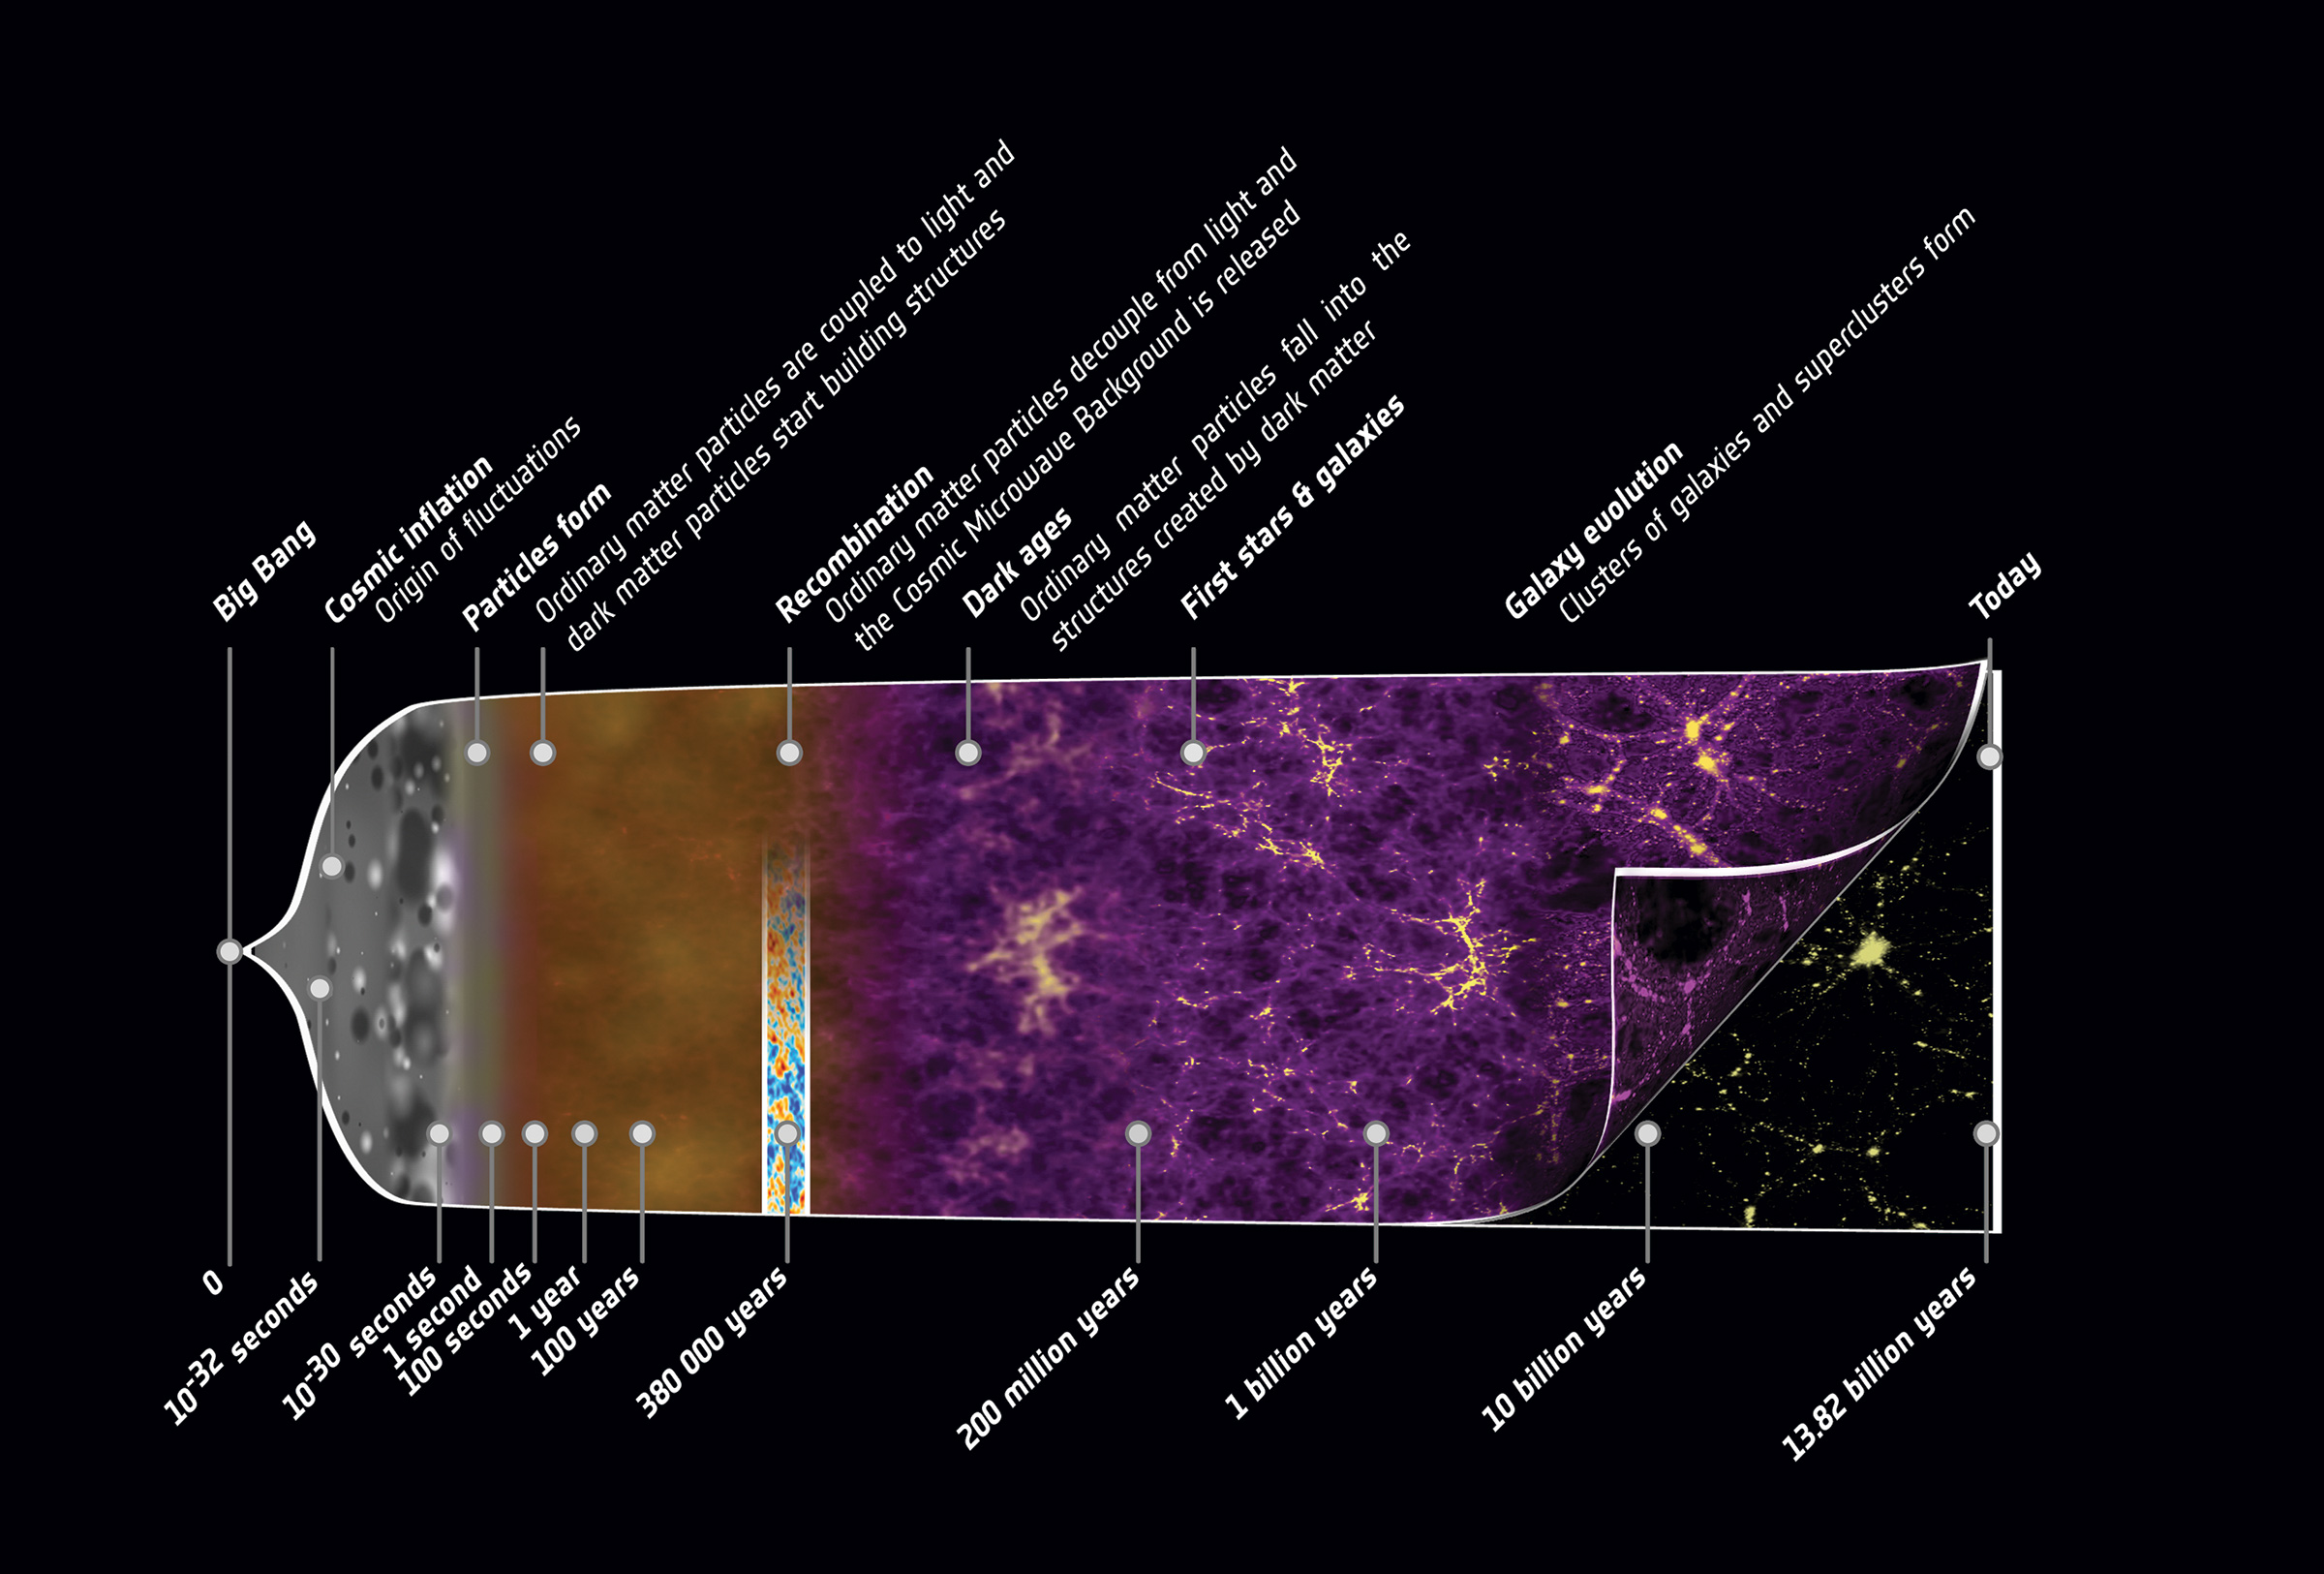 Expansion history of the universe, from the Big Bang to the accelerated expansion we experience today. credit: ESA/C. Carreau